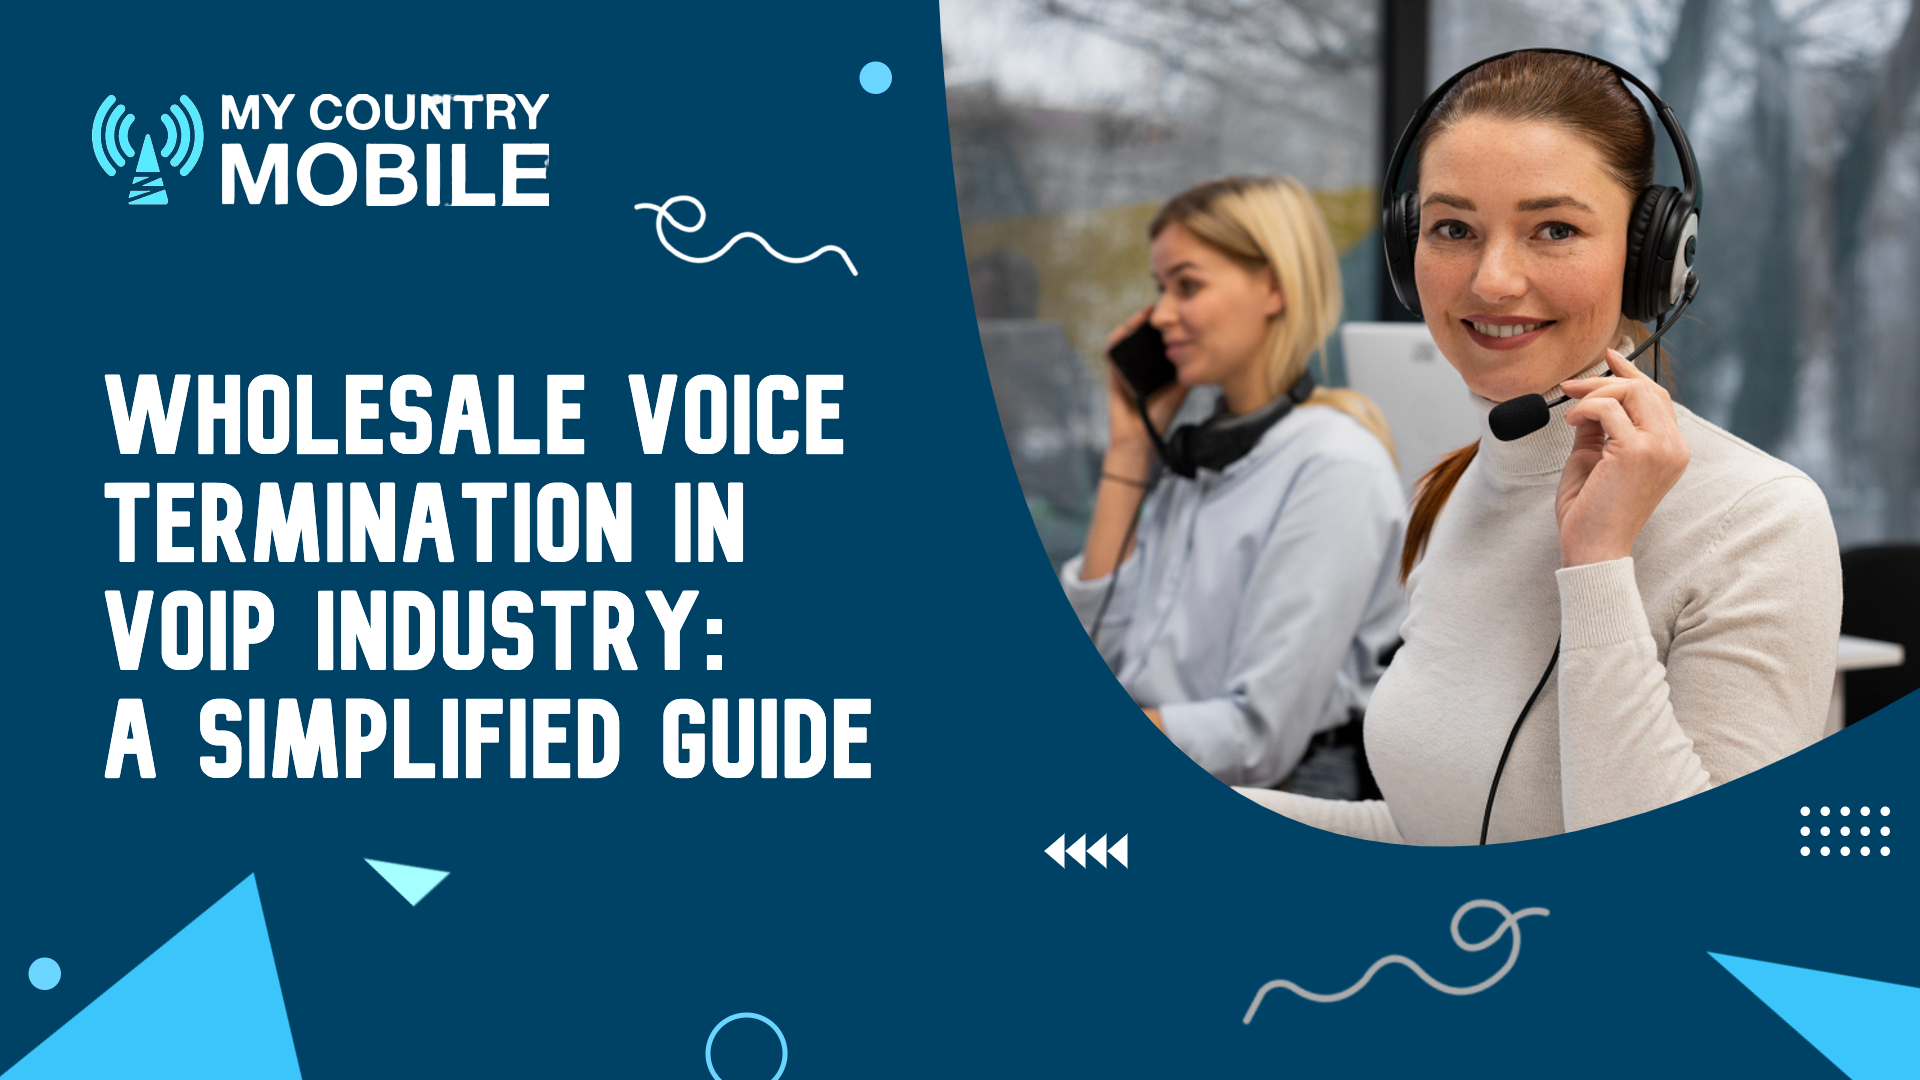 Wholesale Voice Termination in VoIP Industry: A Simplified Guide